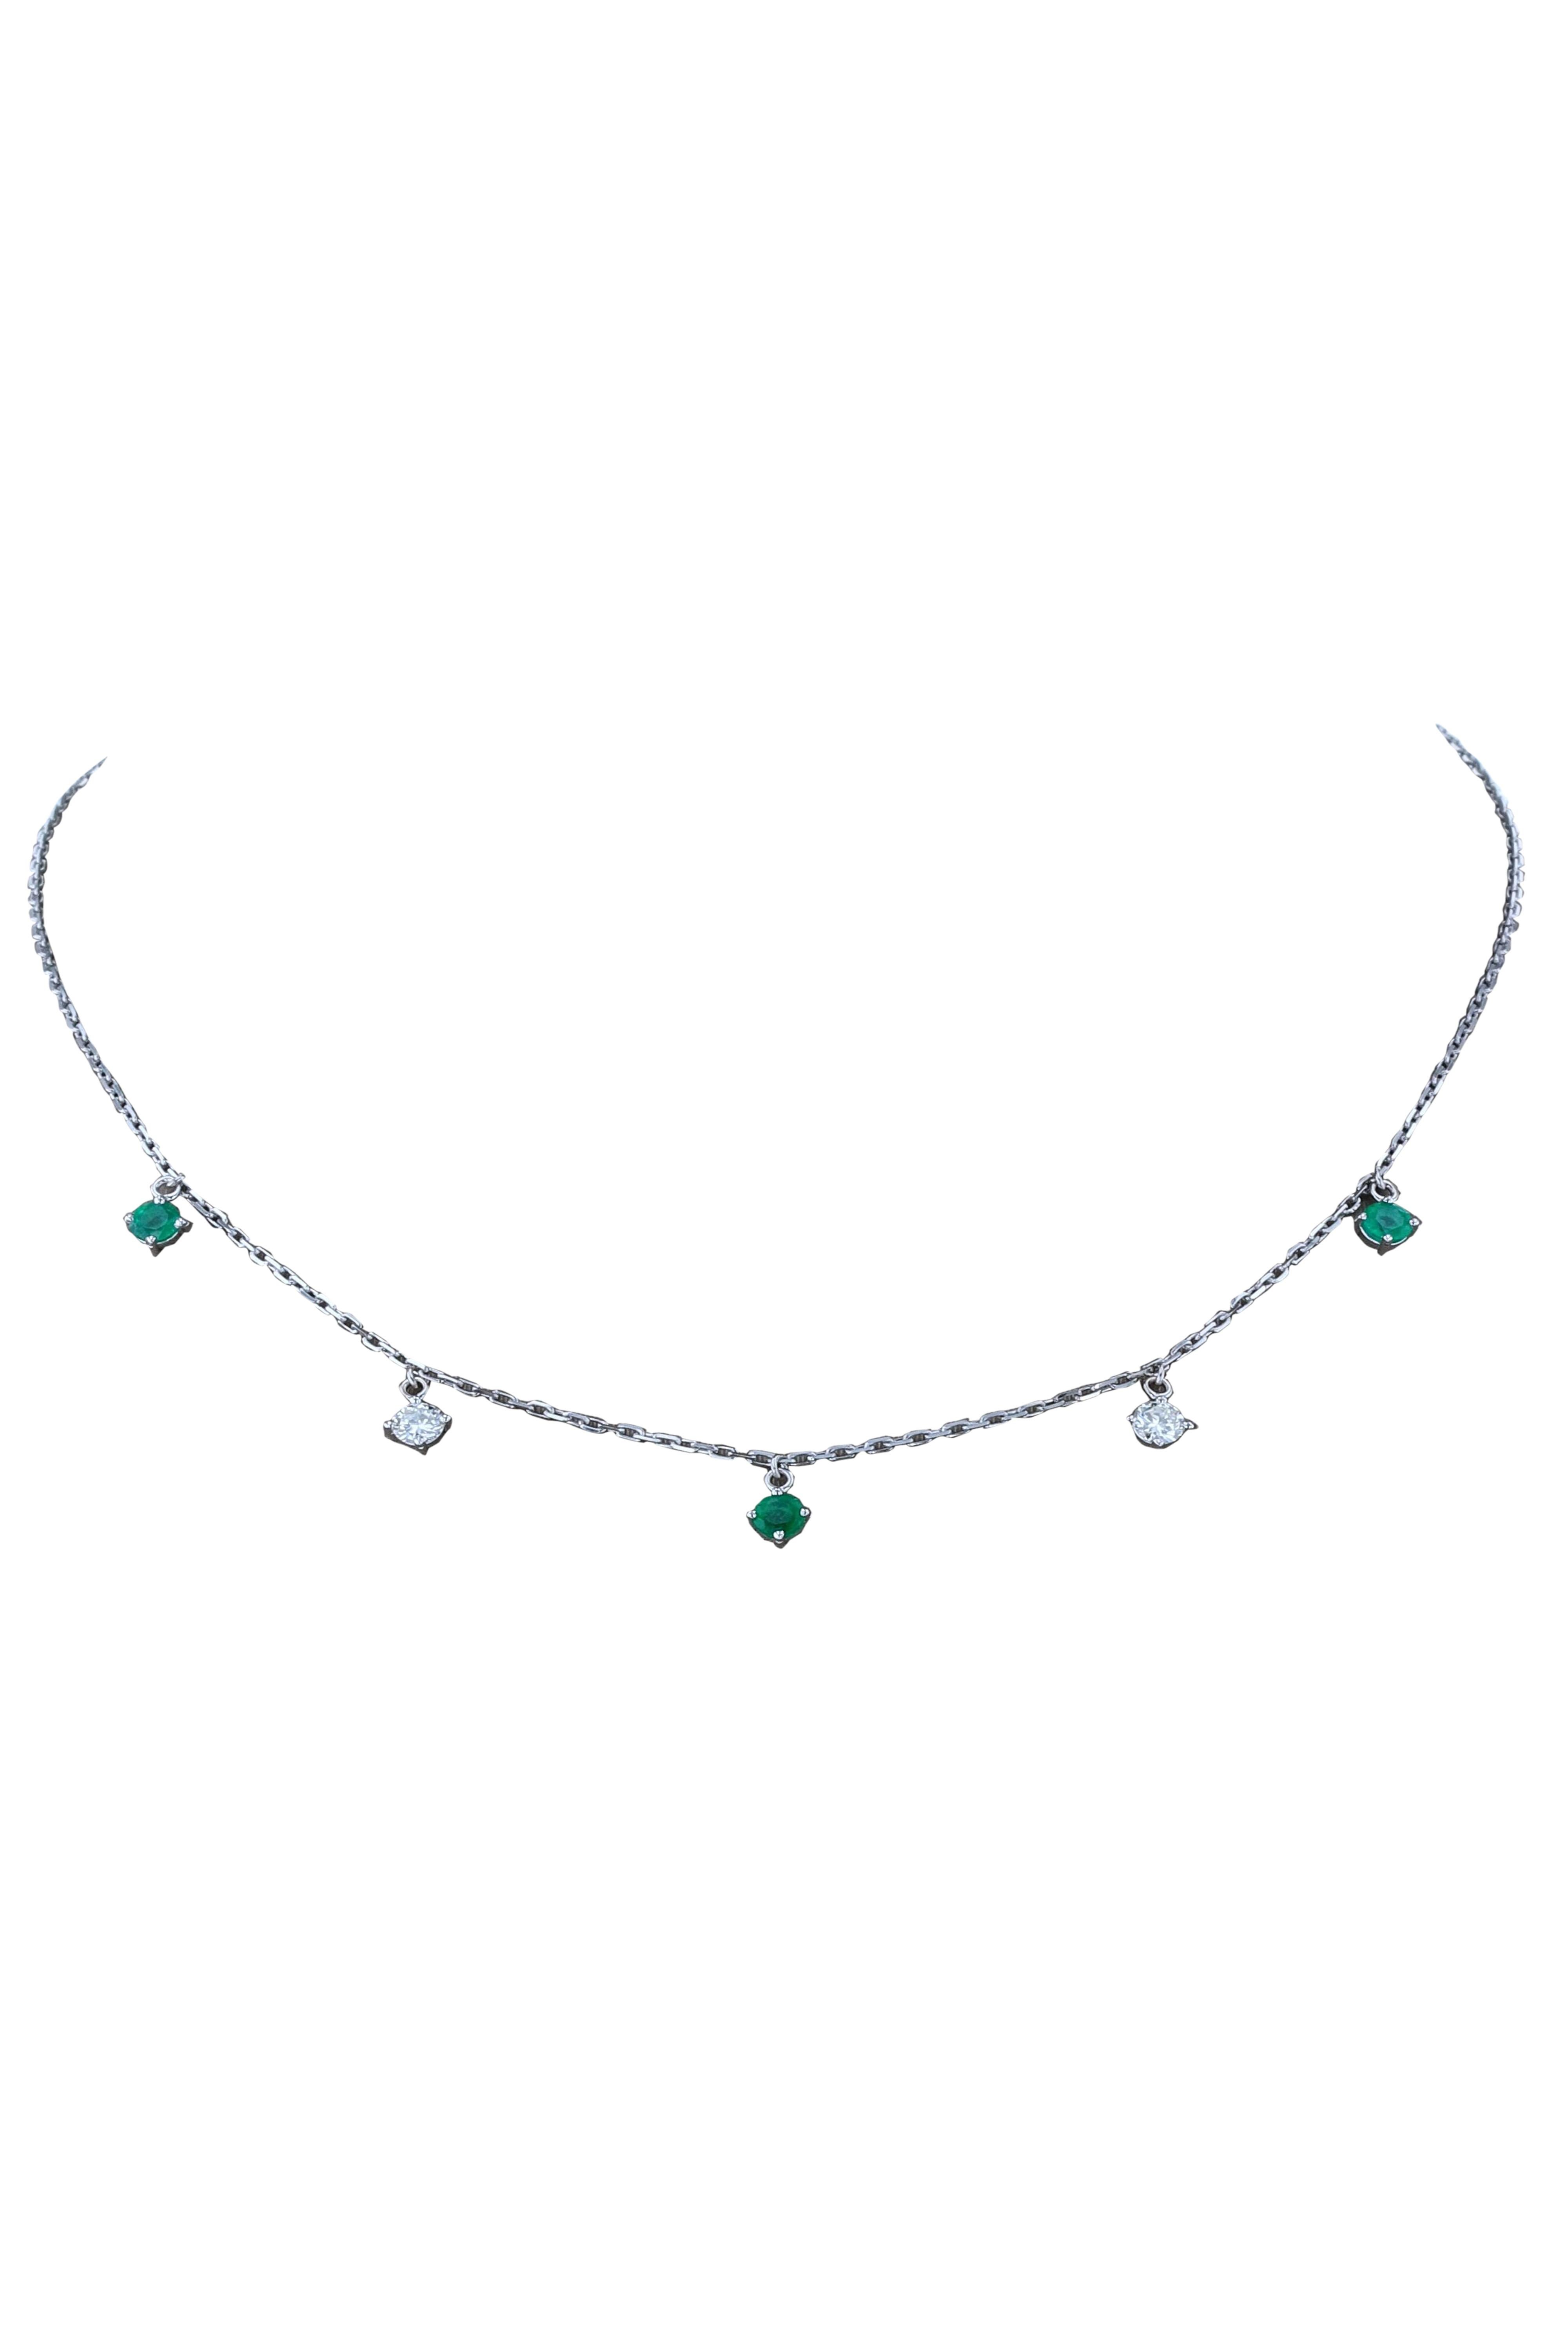 This choker made by Amwaj Jewelry with white gold 18 K, round shape of diamonds and emerald is a perfect choice for casual, fashionable, but in the same time classy look.
Diamond clarity: VS SI / G H color
Diamond weight: 0,36 ct
Emerald weight: